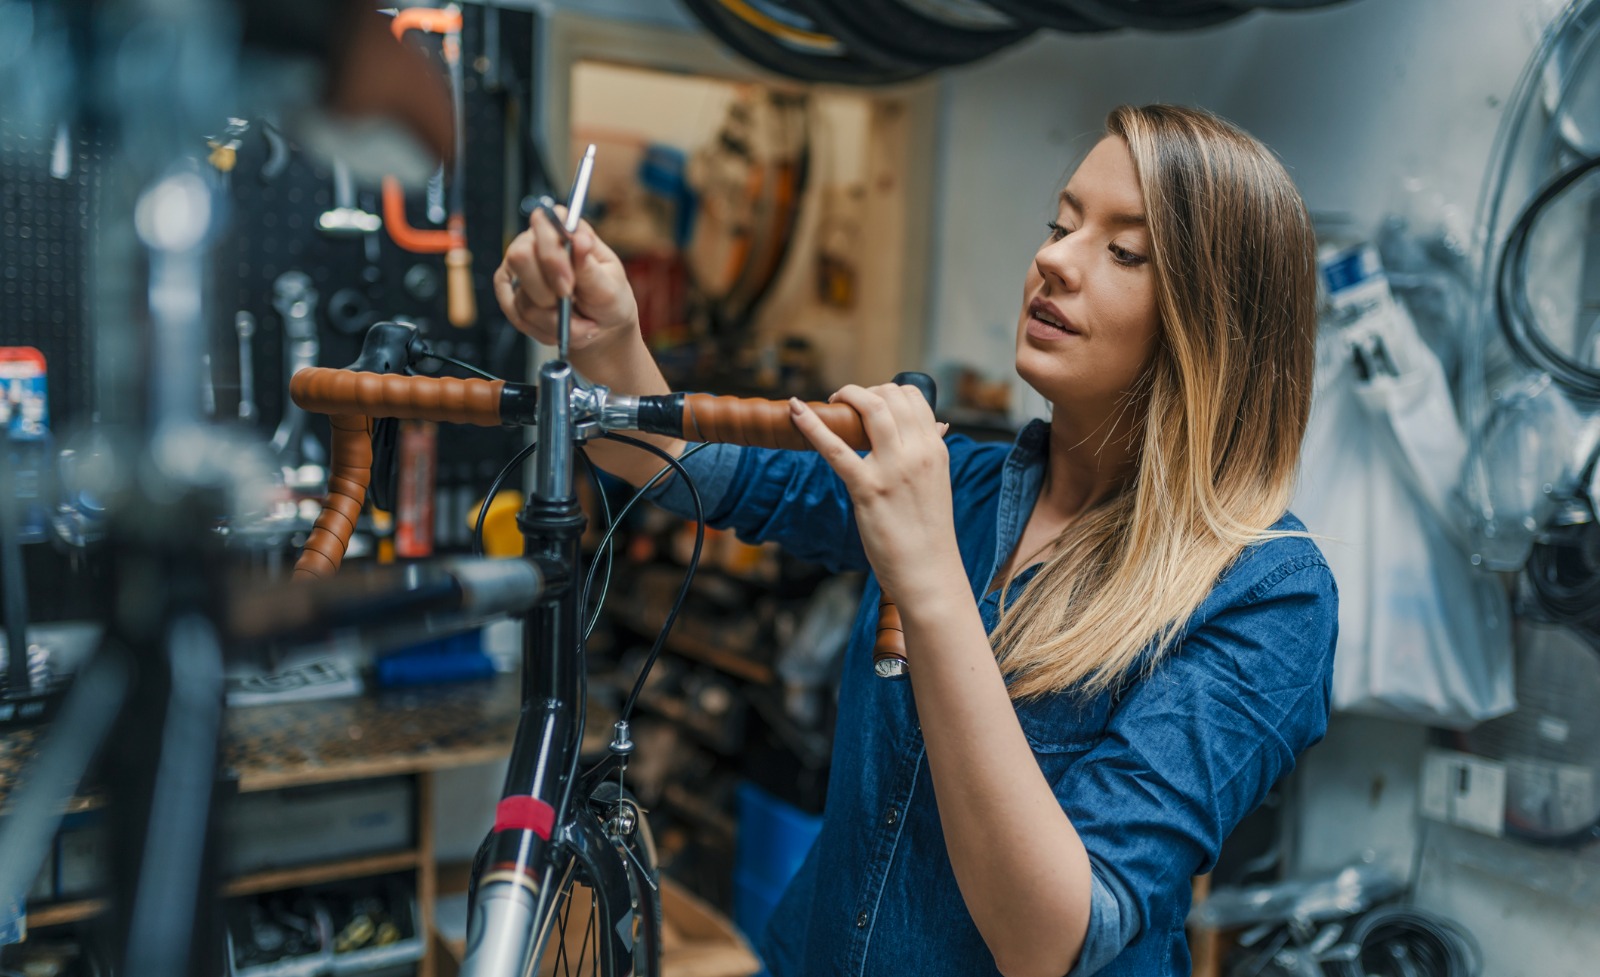 A bicycle shop employee repairing a bicycle.